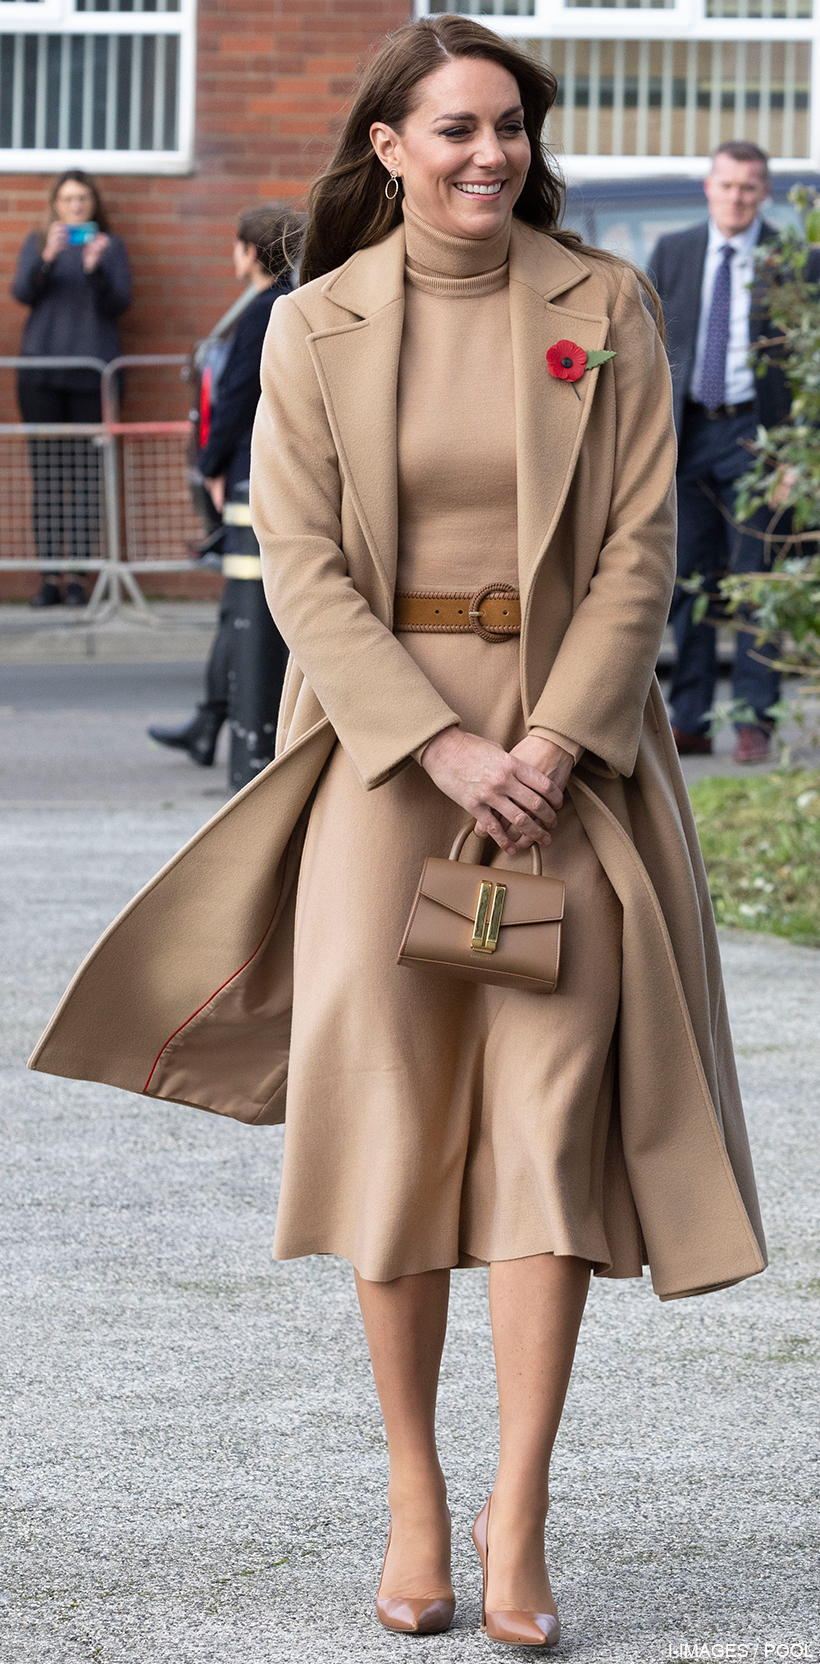 Kate Middleton visiting Scarborough on the 3rd of November 2022 wearing a camel coat, camel skirt and top and matching brown belt, shoes and bag.